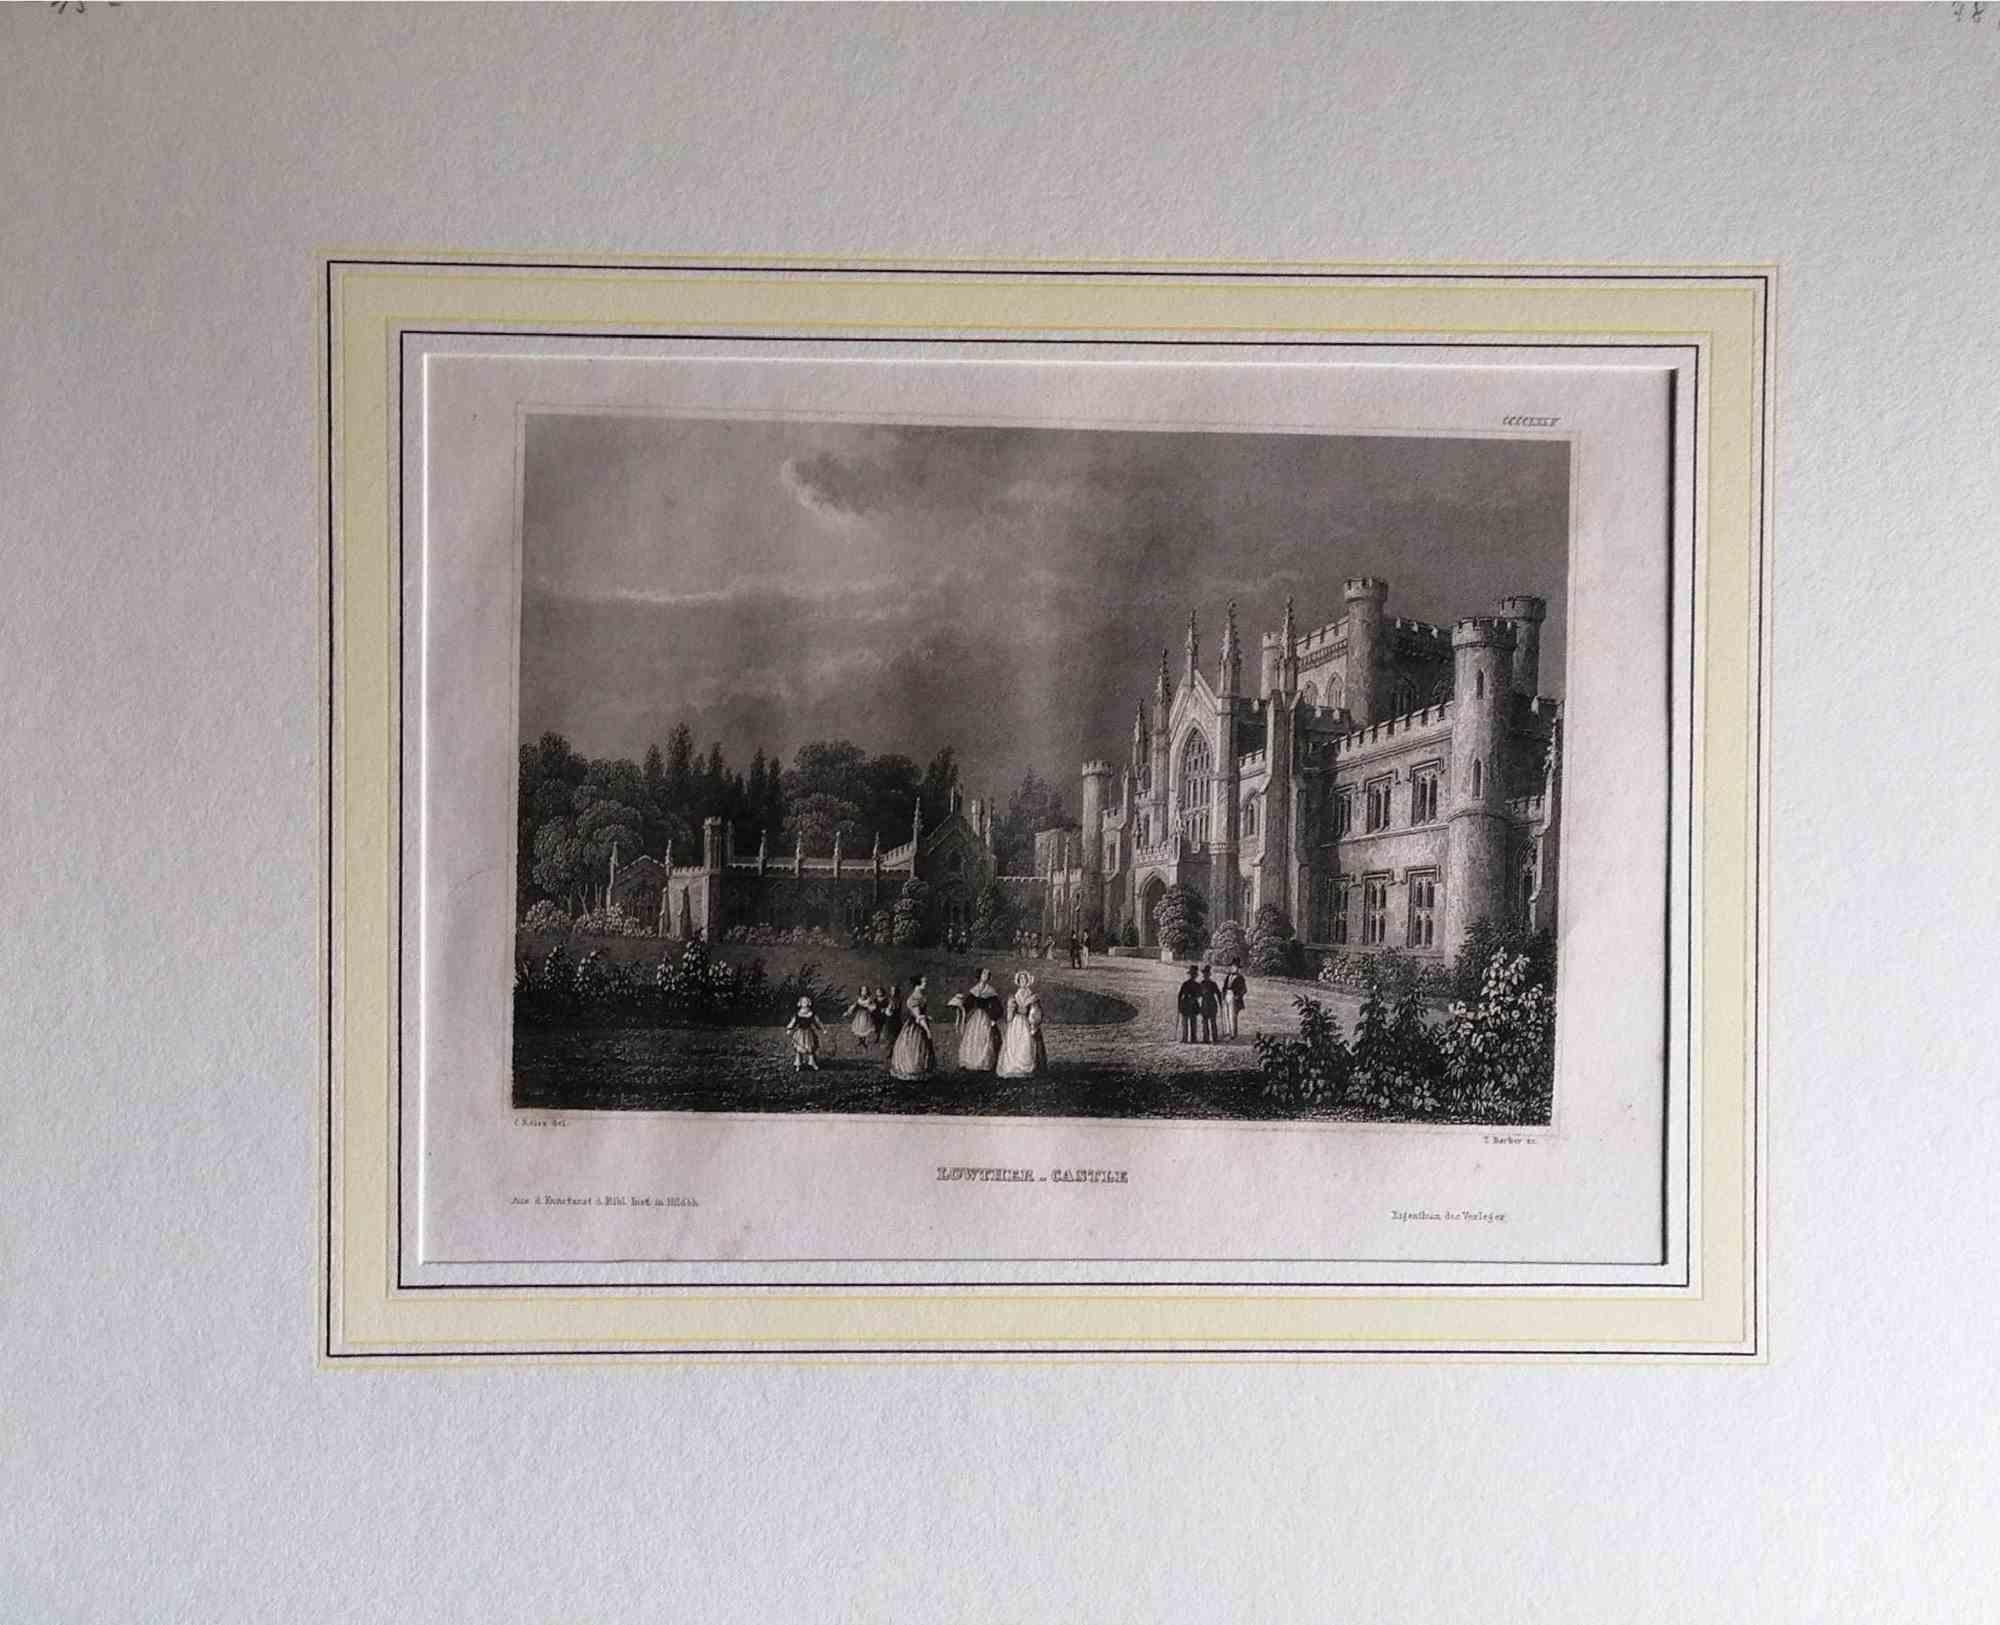 Unknown Figurative Print - Lowther Castle - Original Lithograph - Mid-19th Century